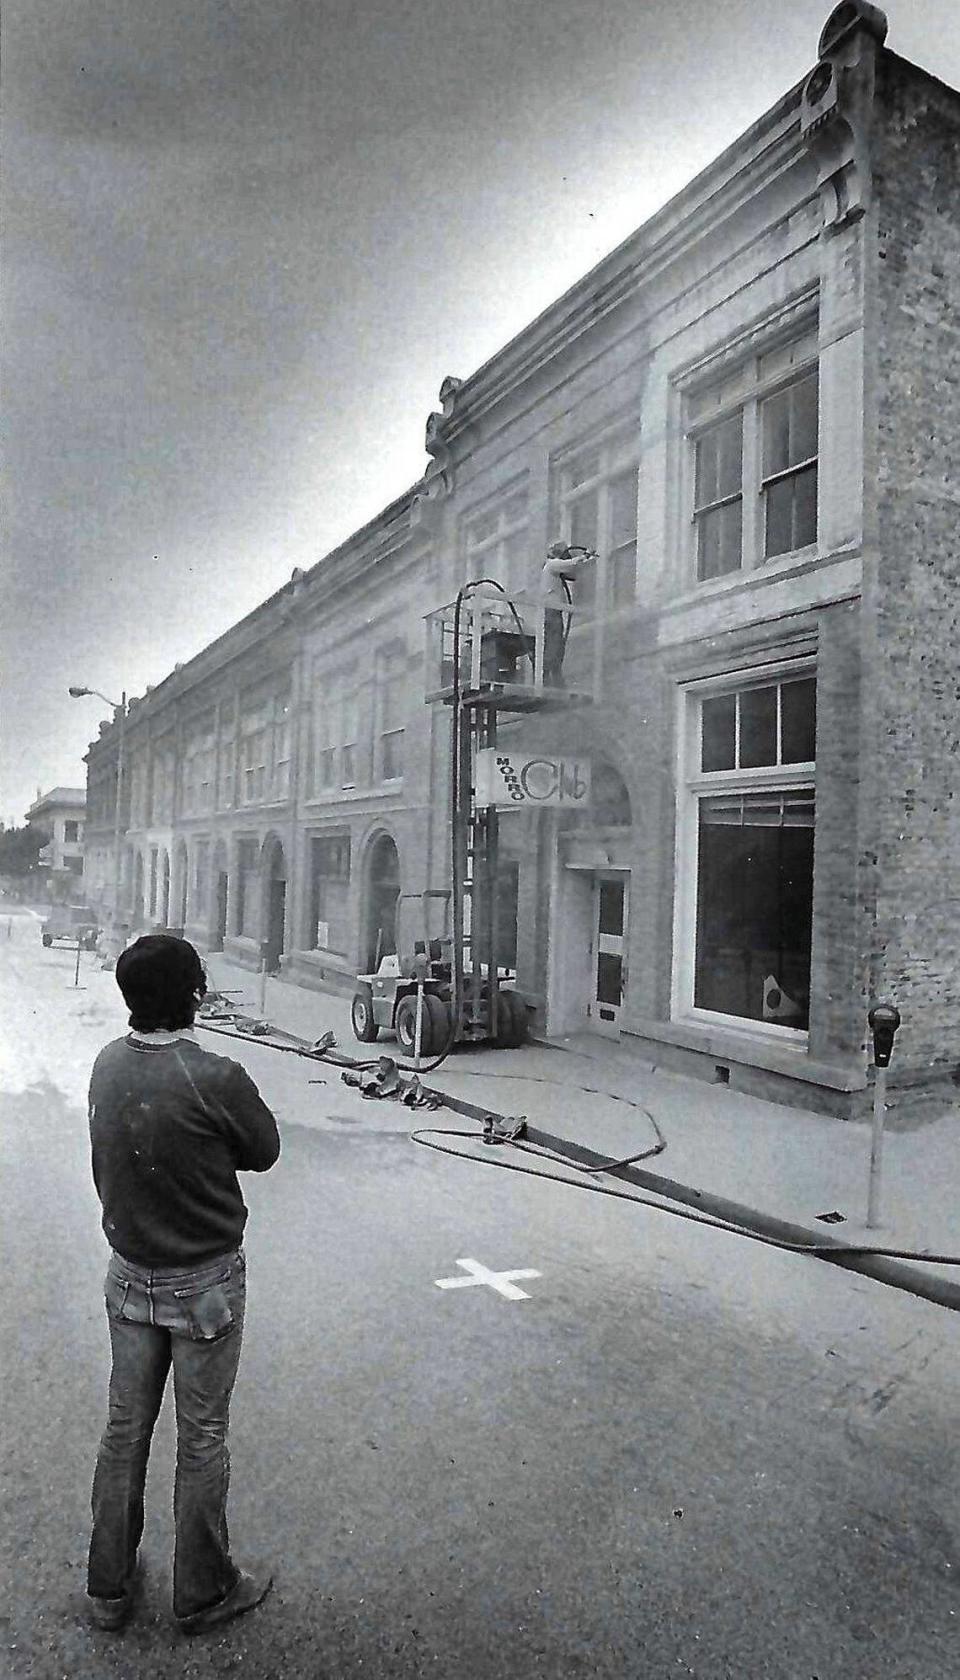 Vincent Fonte, left, watches partner Al McVay sandblast outside of historic Andrews Bank building. Work was being done by the building’s new owners. Sign for the Morro Club is under workman. The Osos Street side of the Andrews Bank building was being sand blasted to remove paint May 7, 1974.